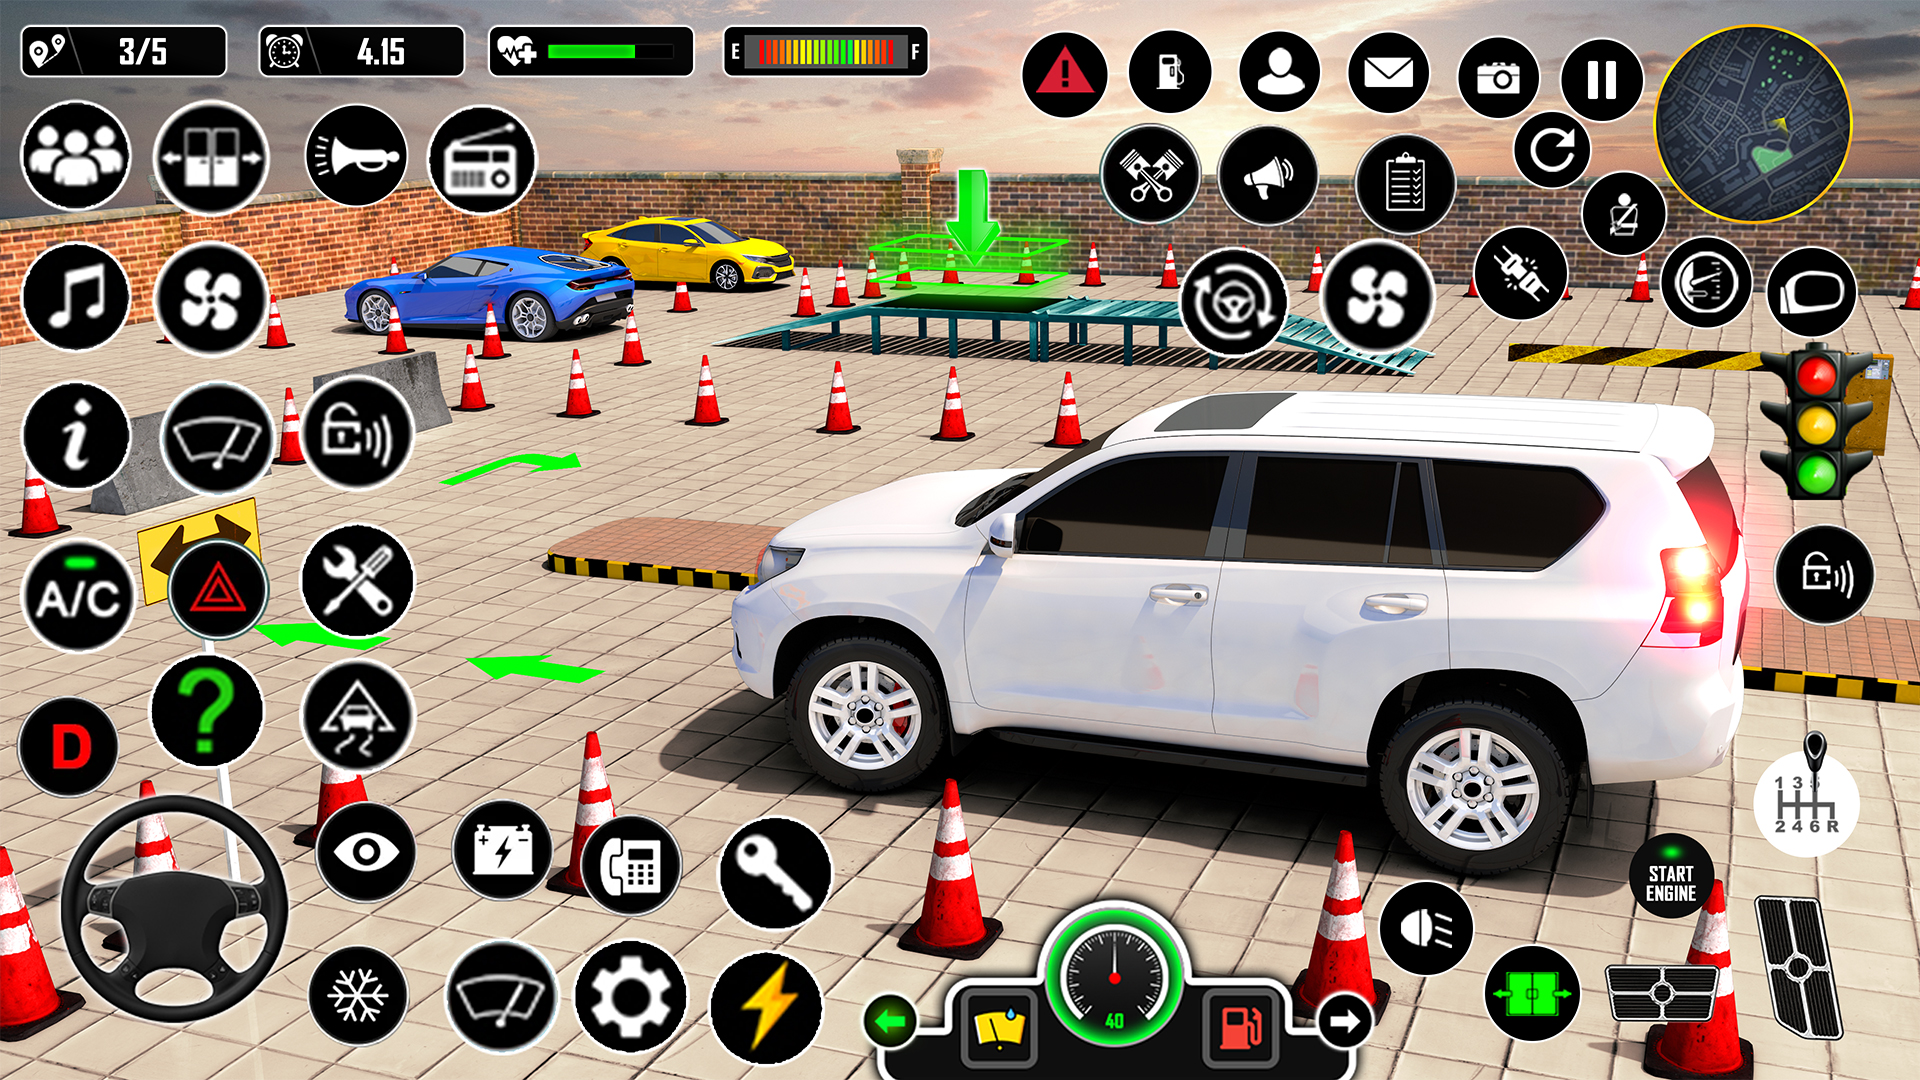 Car Driving - Parking Games 3D on the App Store